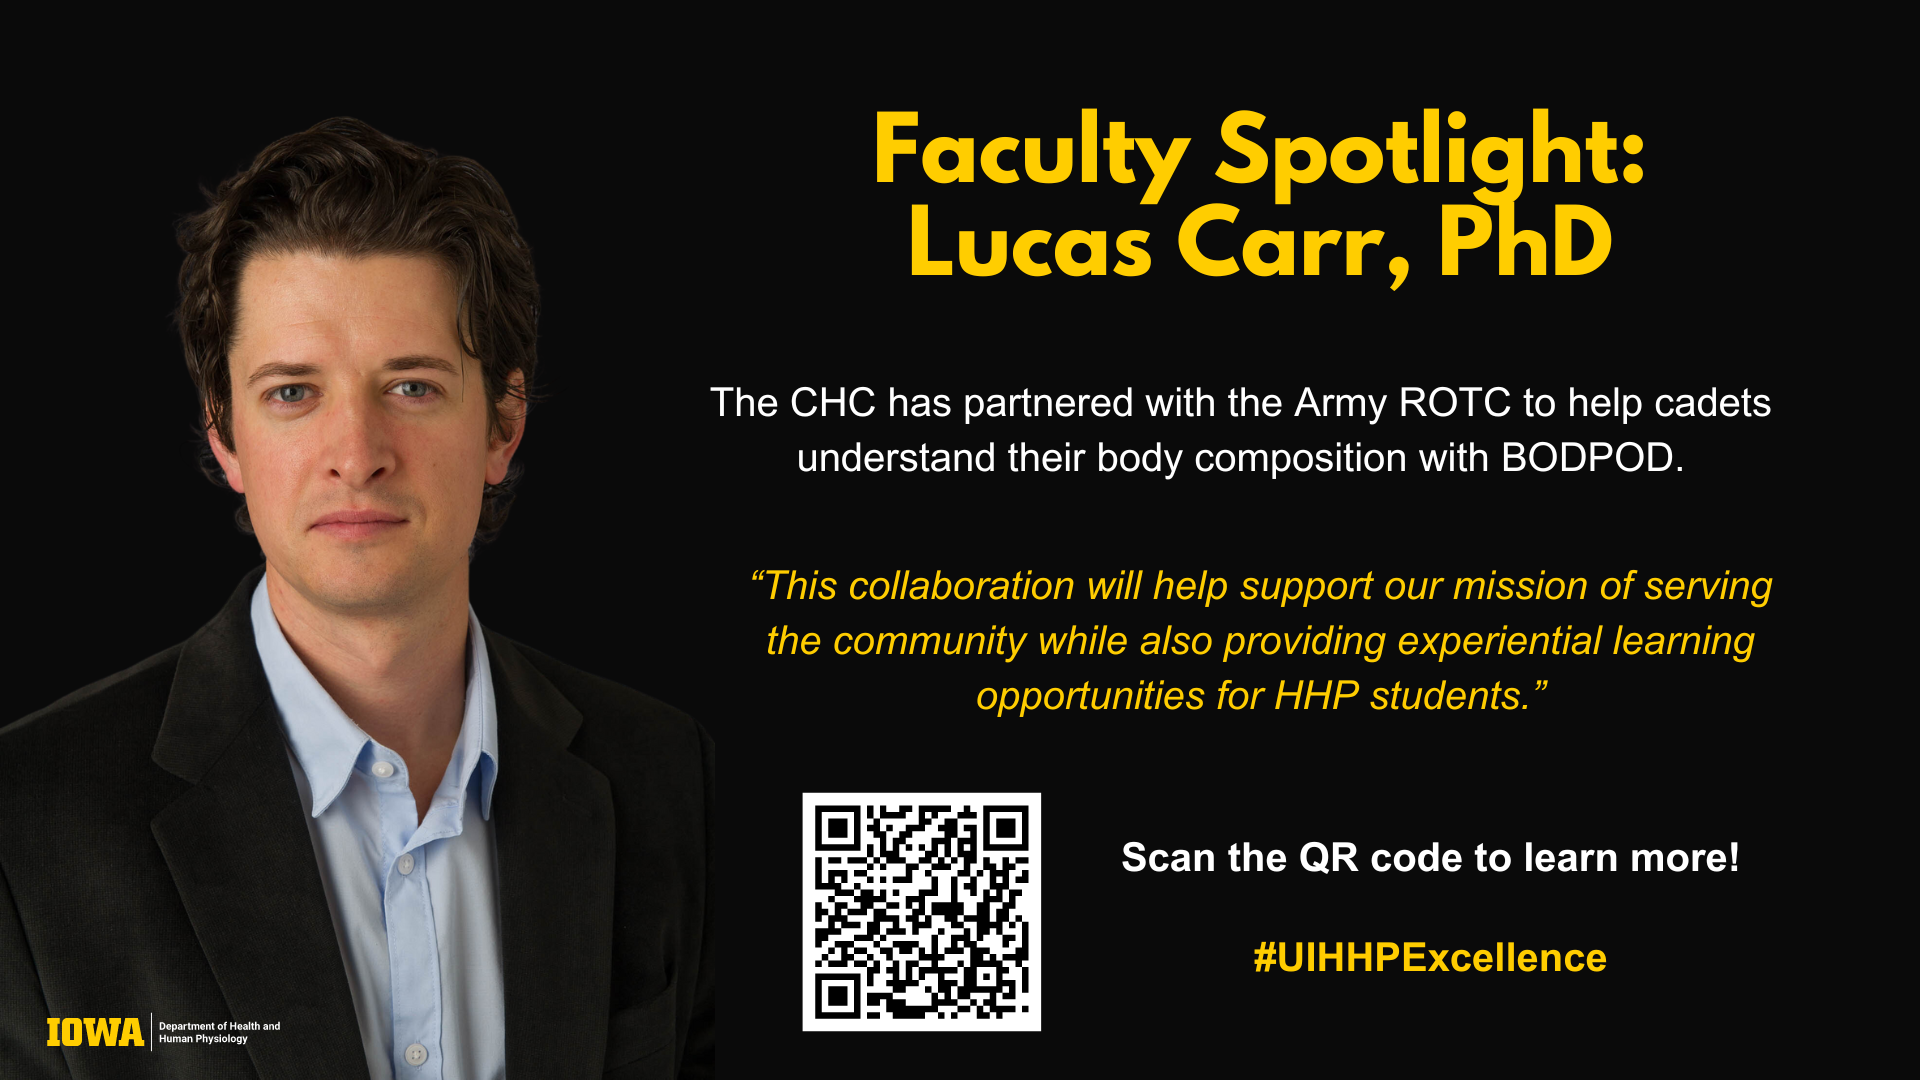 Faculty Spotlight:  Lucas Carr, PhD The CHC has partnered with the Army ROTC to help cadets understand their body compostion with BODPOD. “This collaboration will help support our mission of serving the community while also providing experiential learning opportunities for HHP students.” Scan the QR code to learn more! #UIHHPExcellence